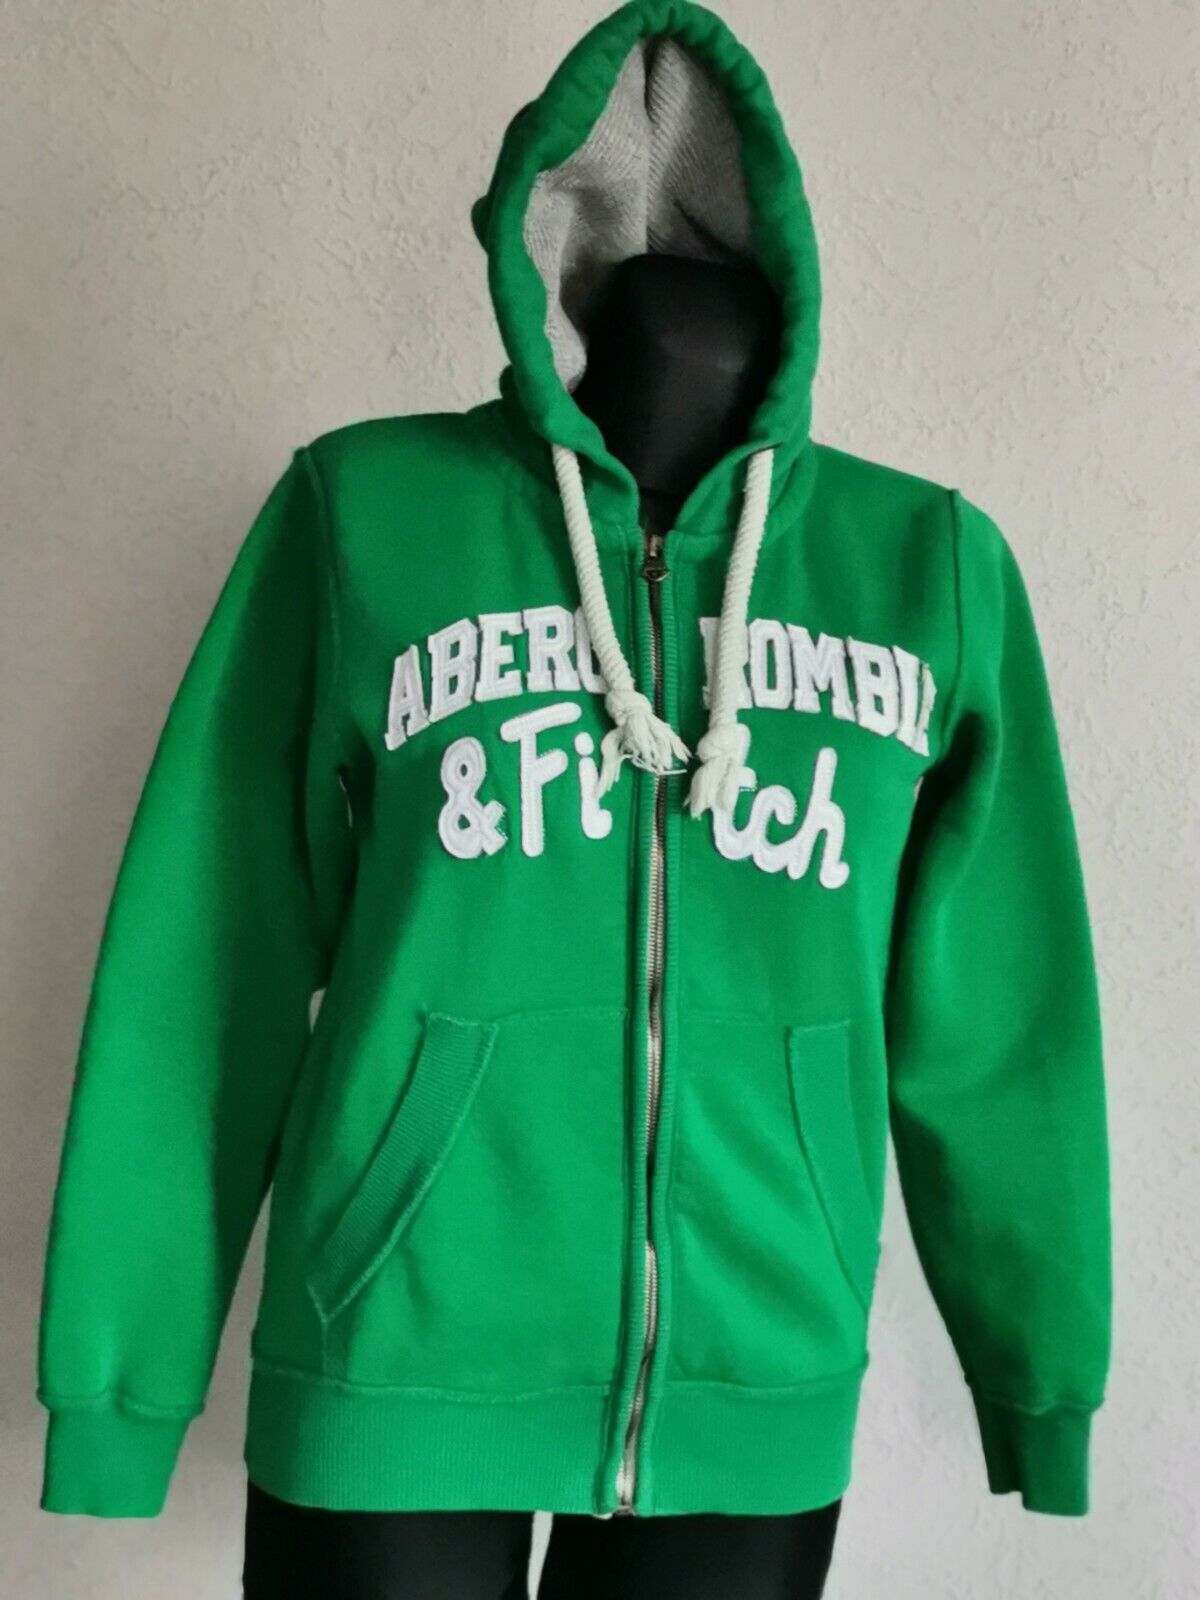 Abercrombie Fitch womens long sleeve 40% OFF Cheap Sale with green sweatshirt OFFicial store hoo